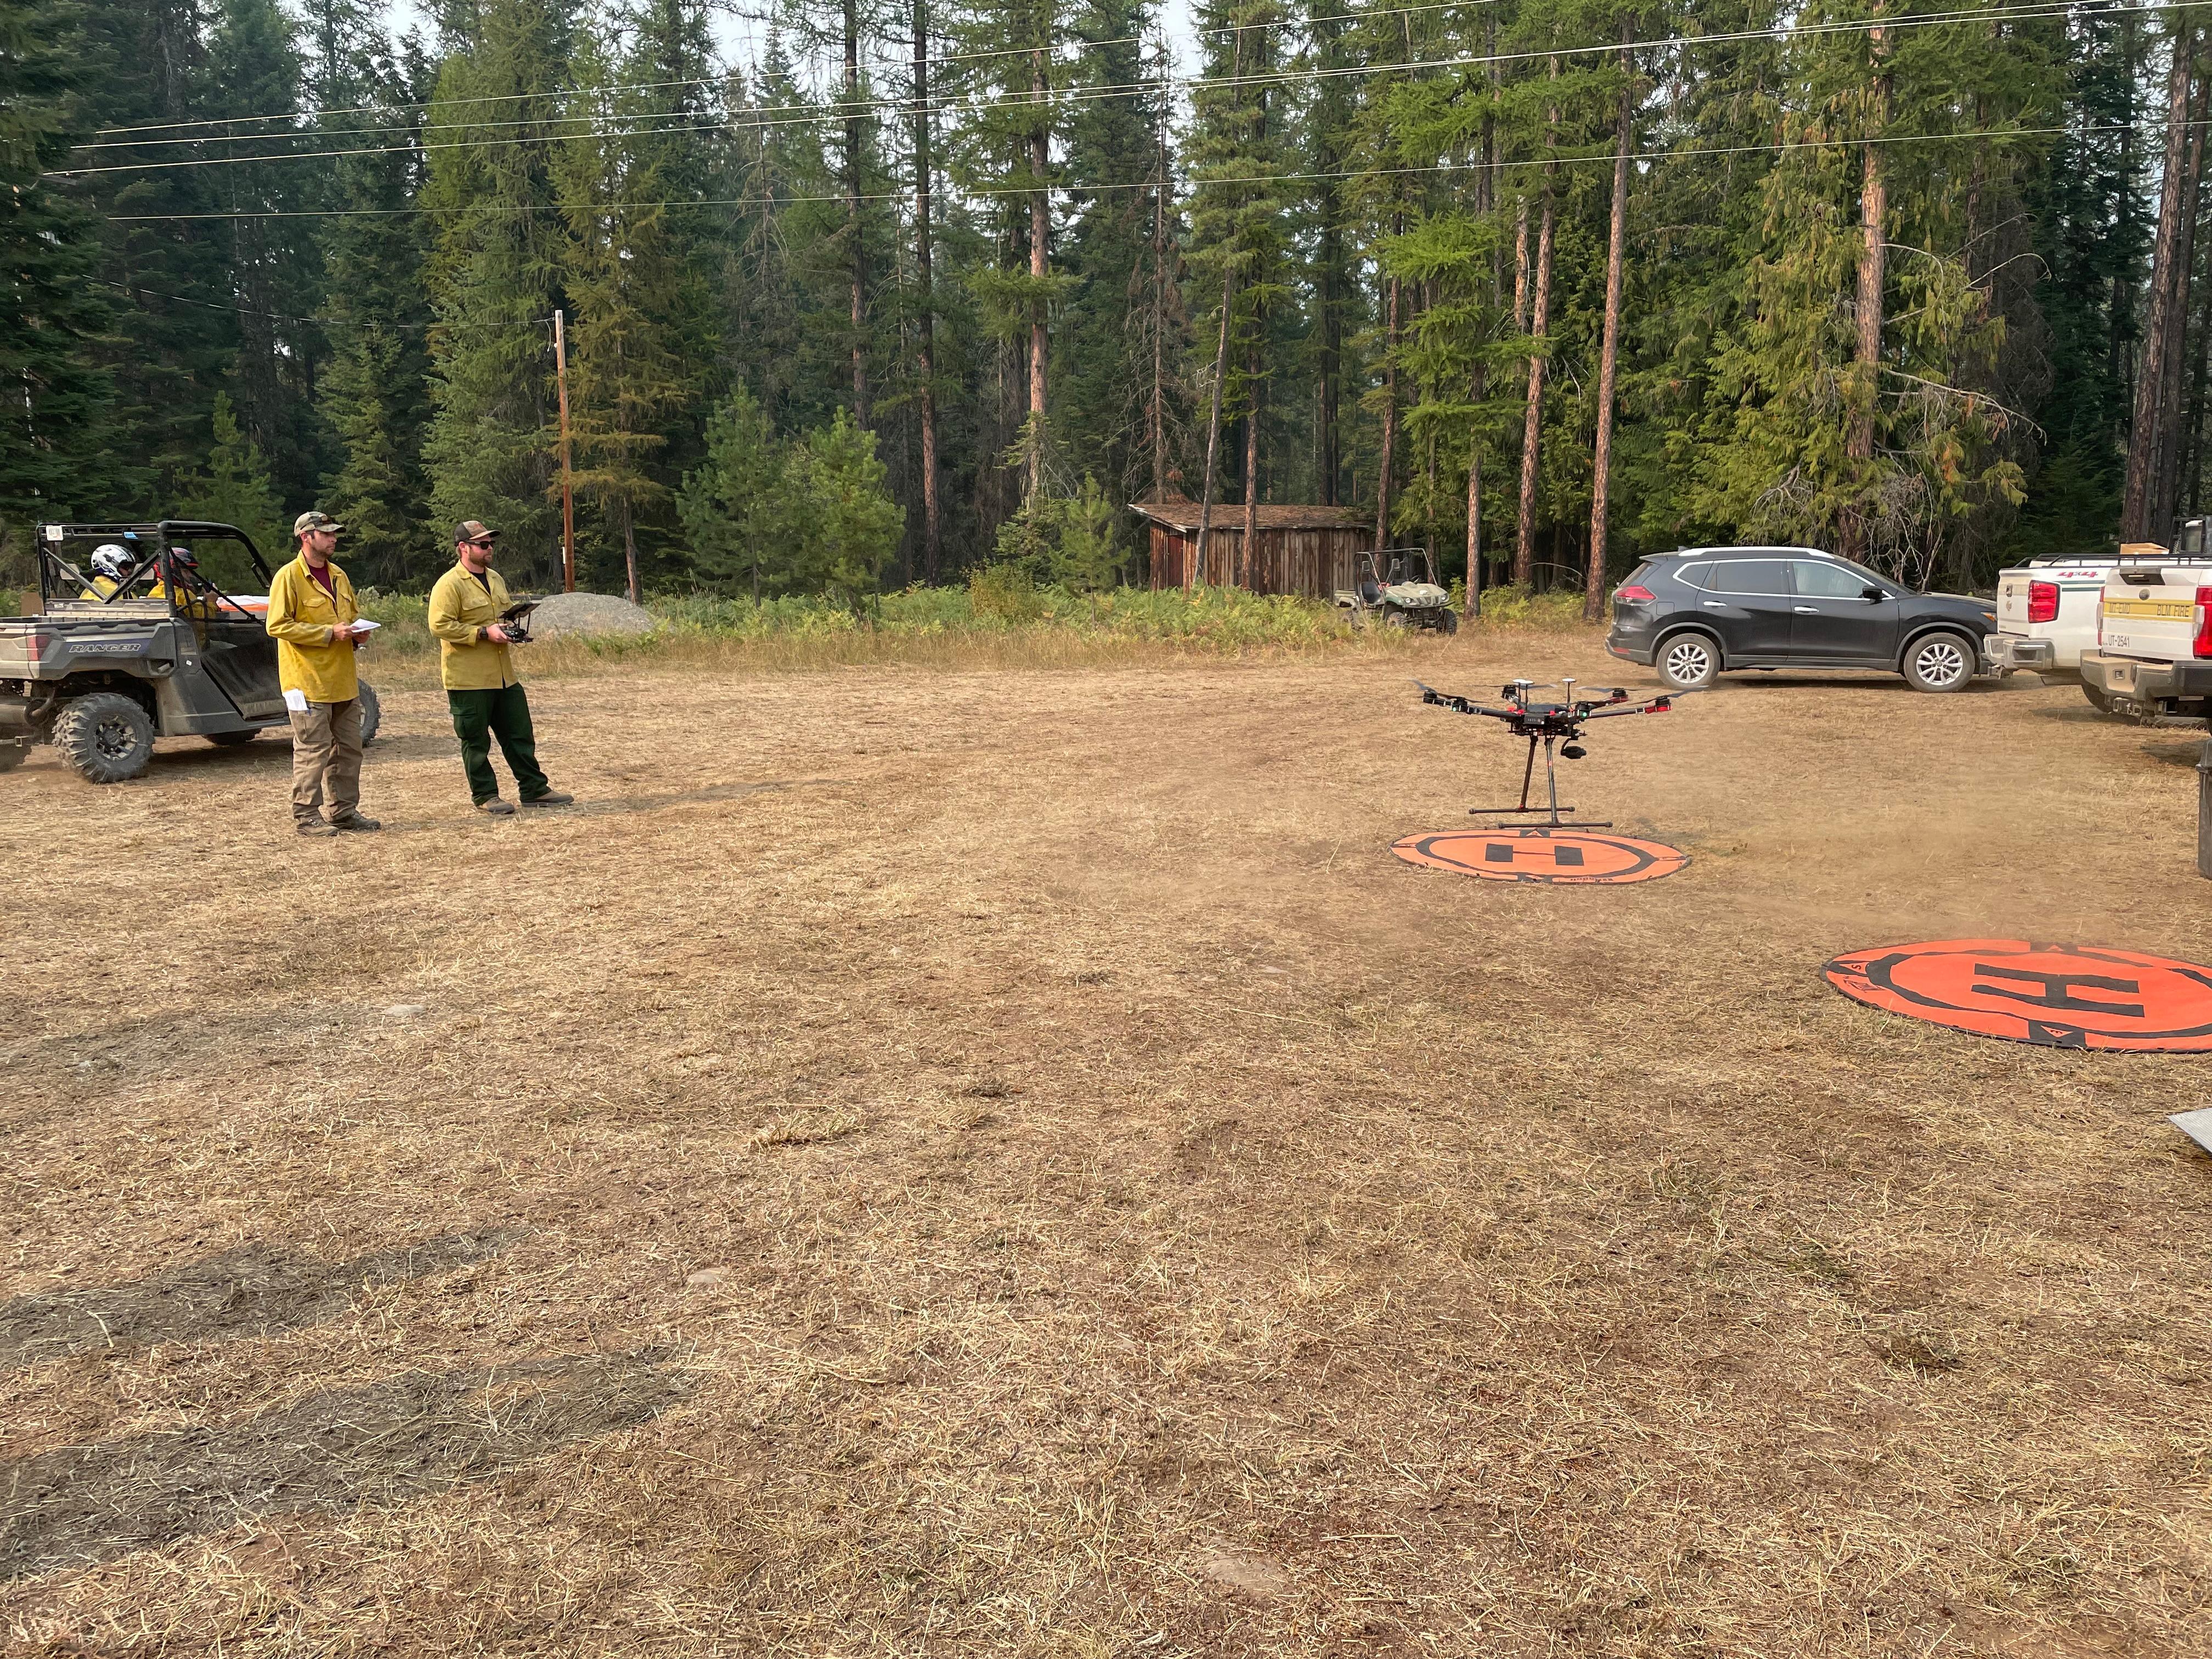 The Unmanned Aerial System (UAS) module demonstrates drone capabilities at a stakeholder meeting on 9.13.2022. Photo: J. Lavelle PIO, Northern Rockies Team 7